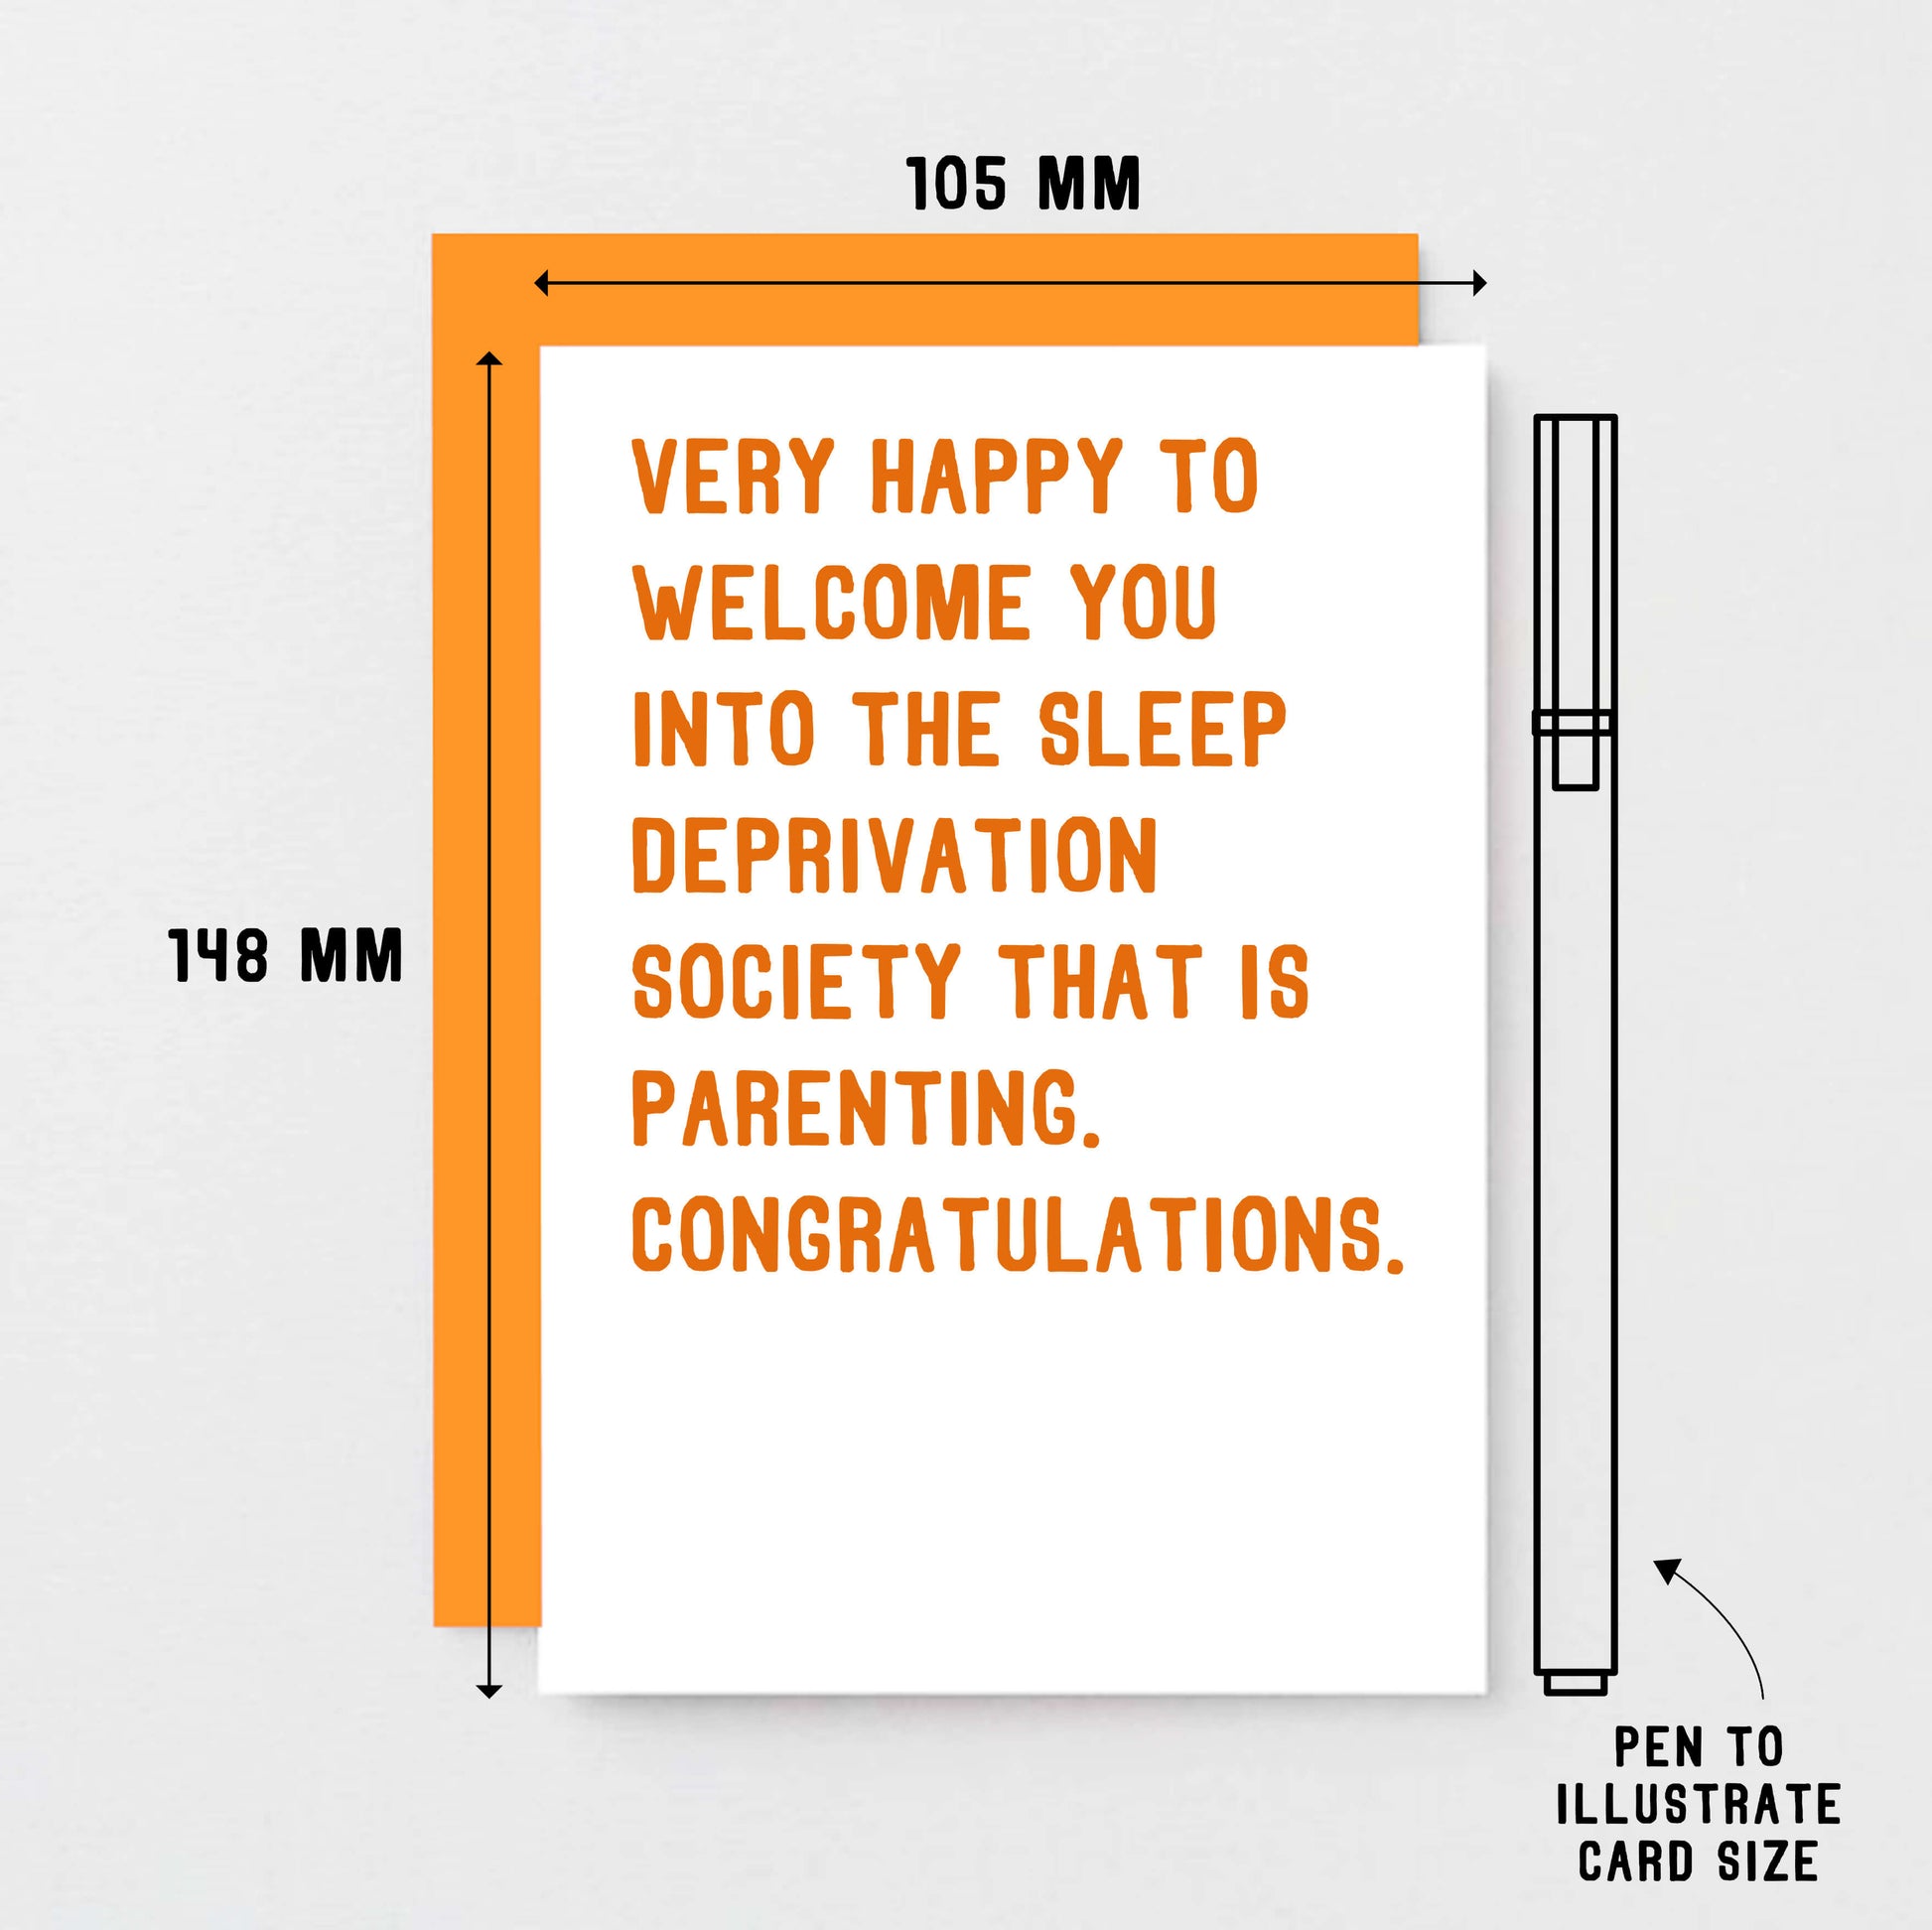 New Baby Card by SixElevenCreations. Reads Very happy to welcome you into the sleep deprivation society that is parenting. Congratulations. Product Code SE2031A6